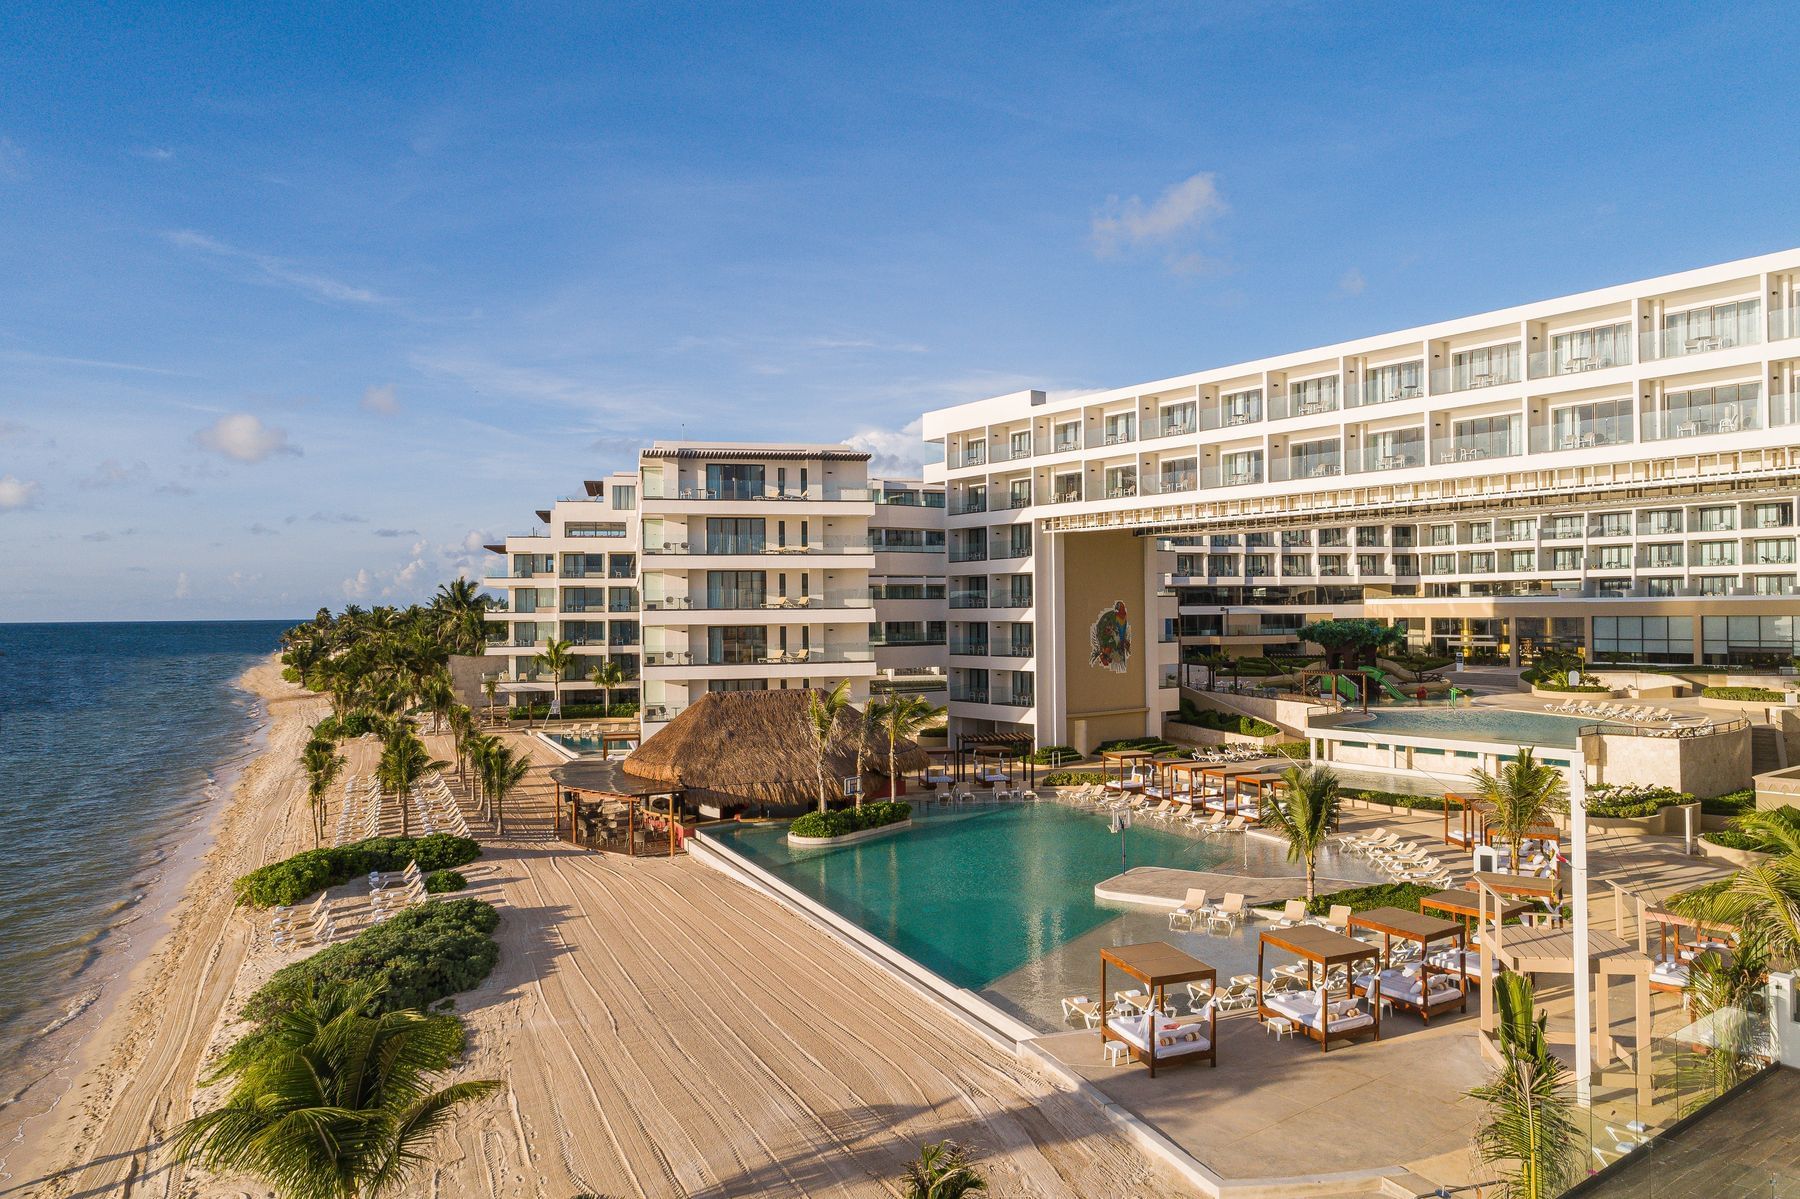 Win a week of all-inclusive luxury in Mexico!